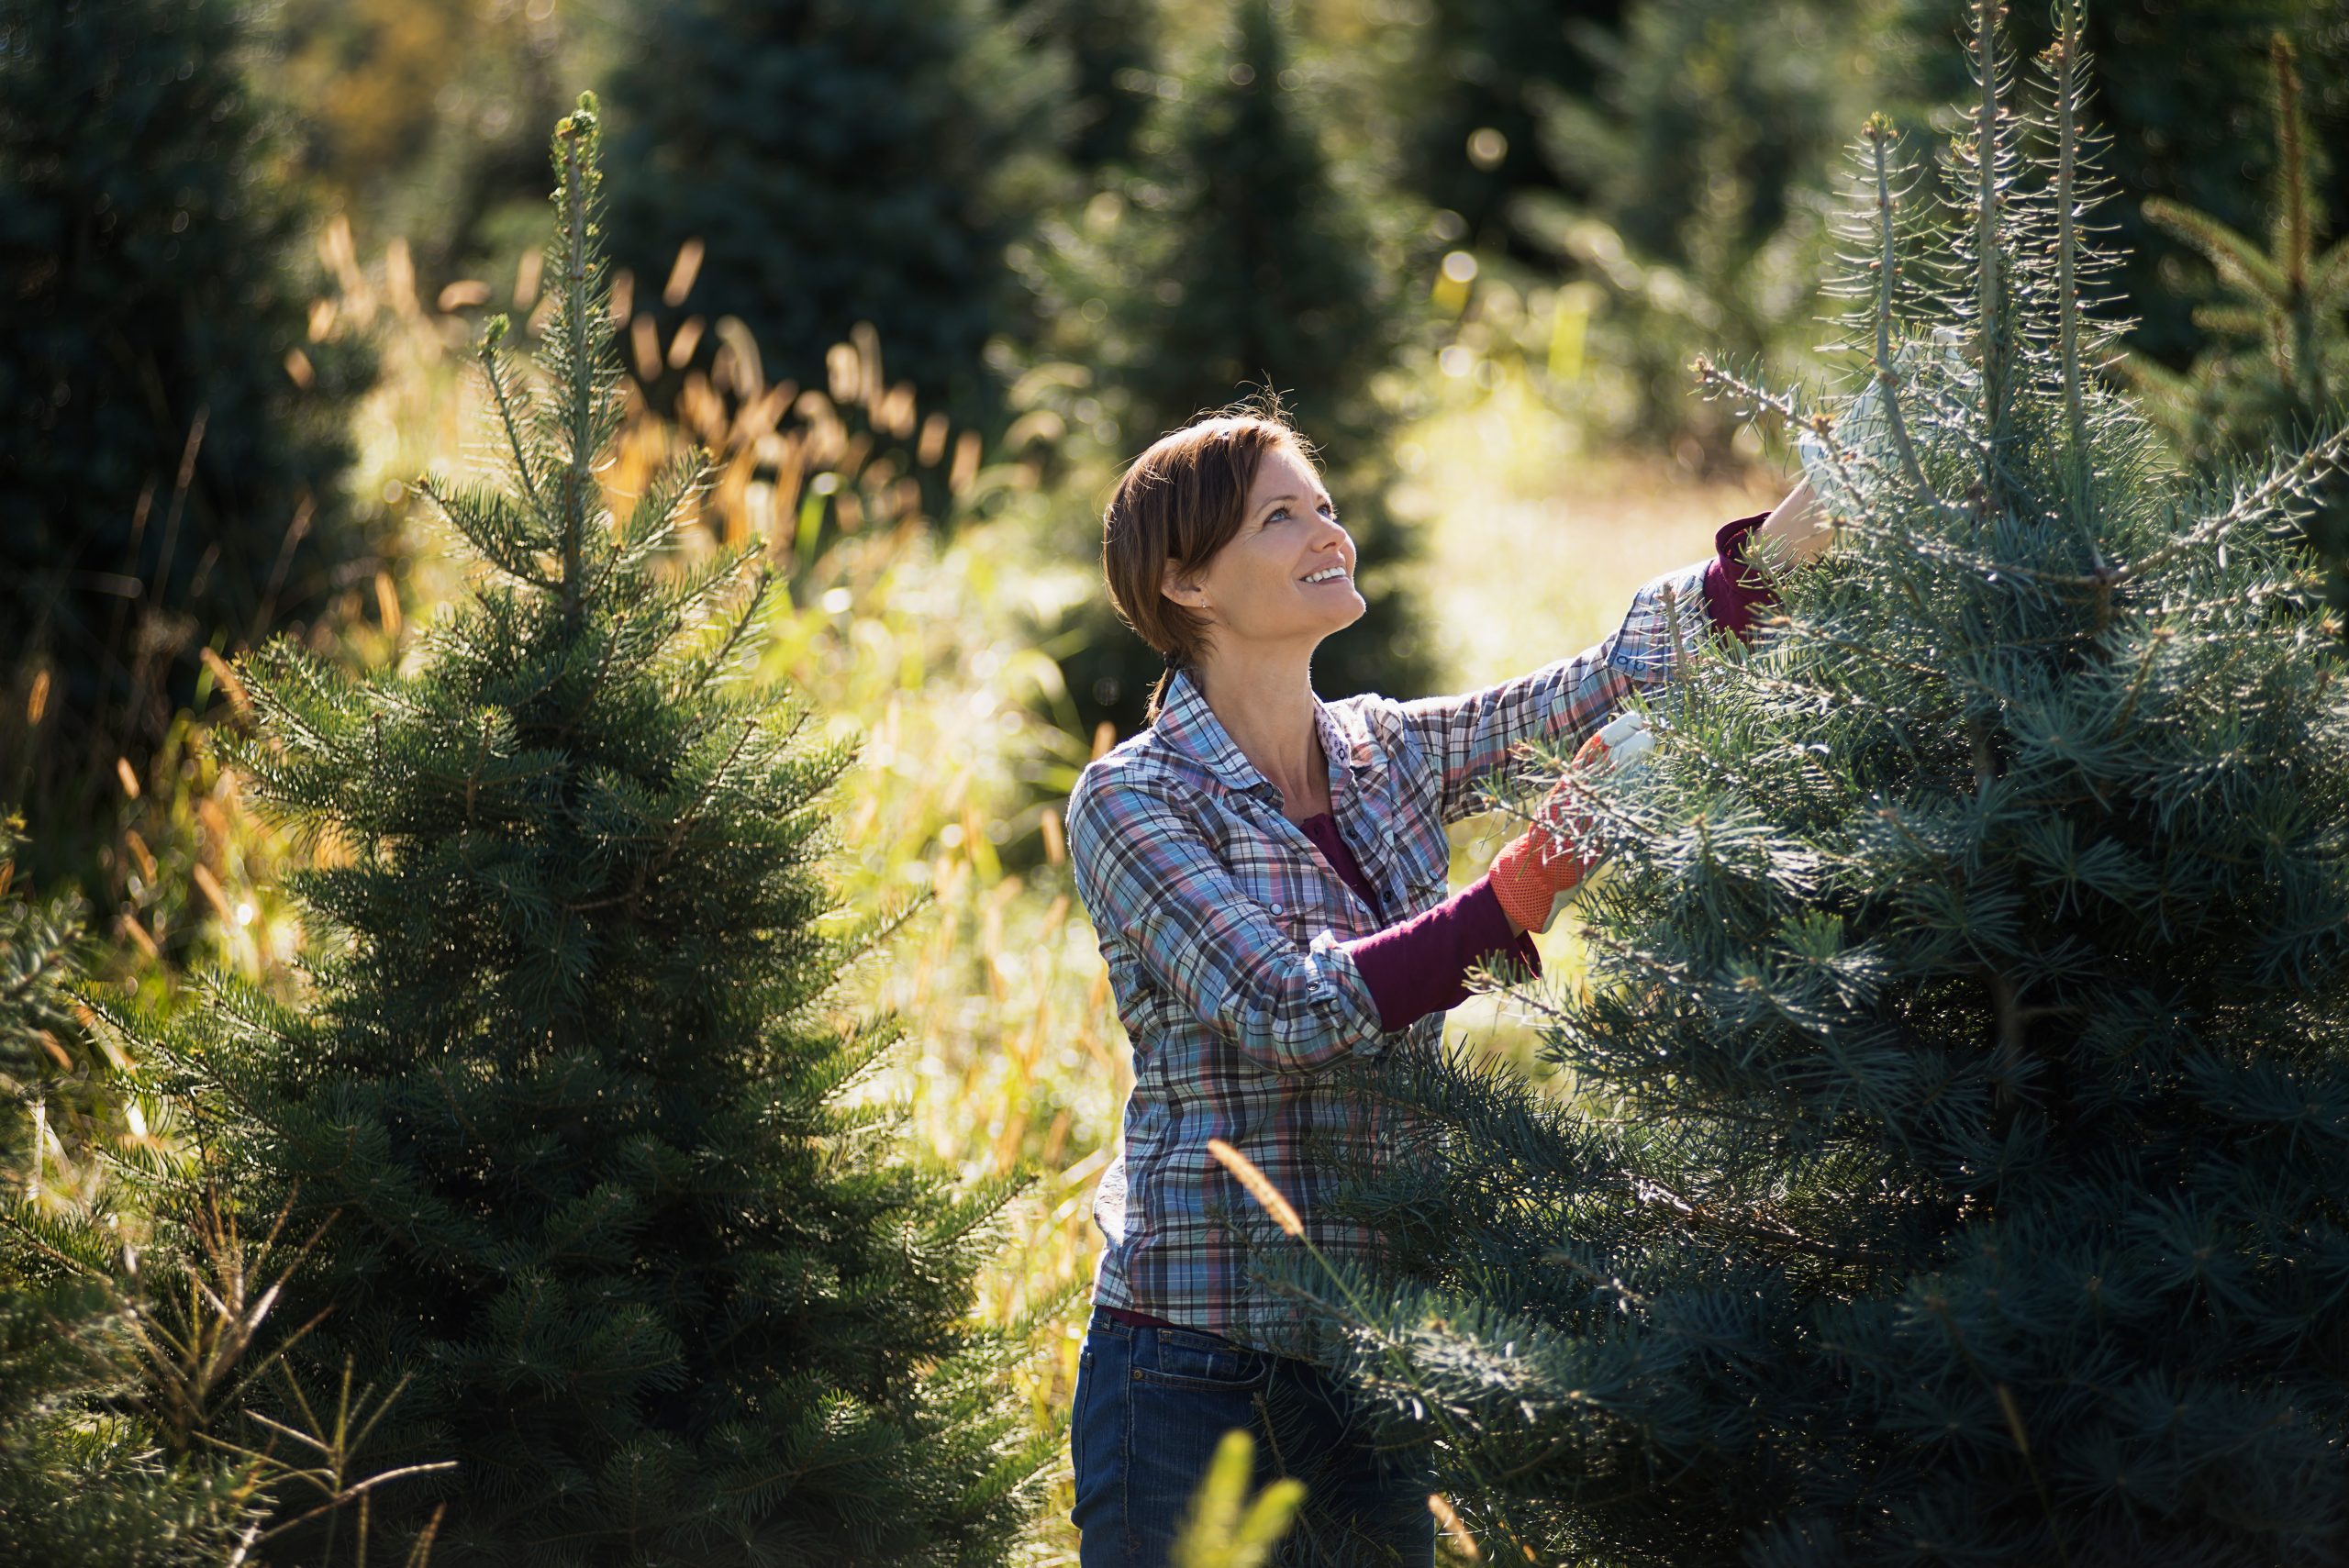 Photo of a woman pruning and caring for a live Christmas tree.